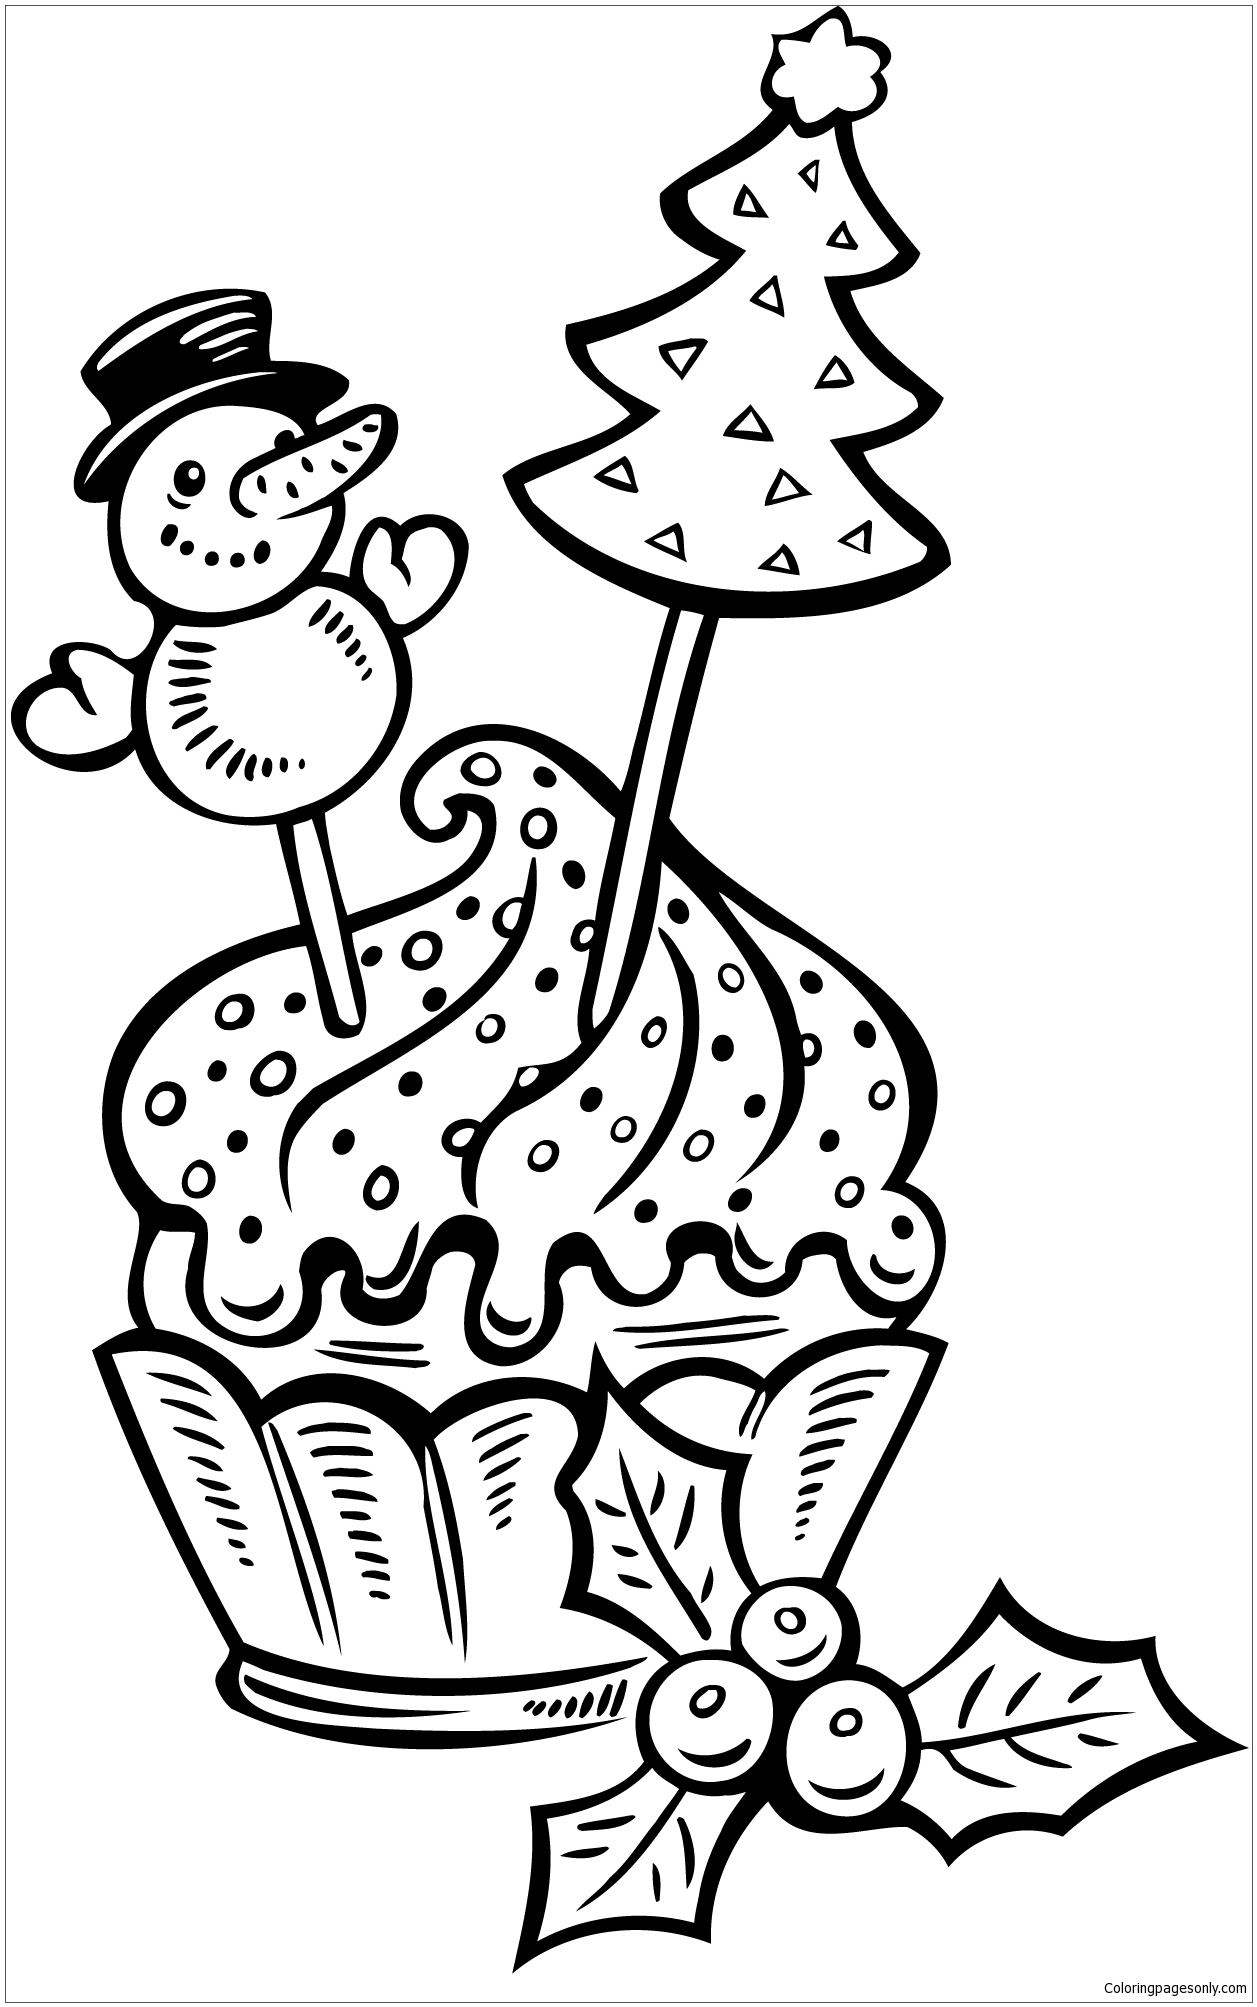 Christmas Cake Cup Coloring Page - Free Coloring Pages Online